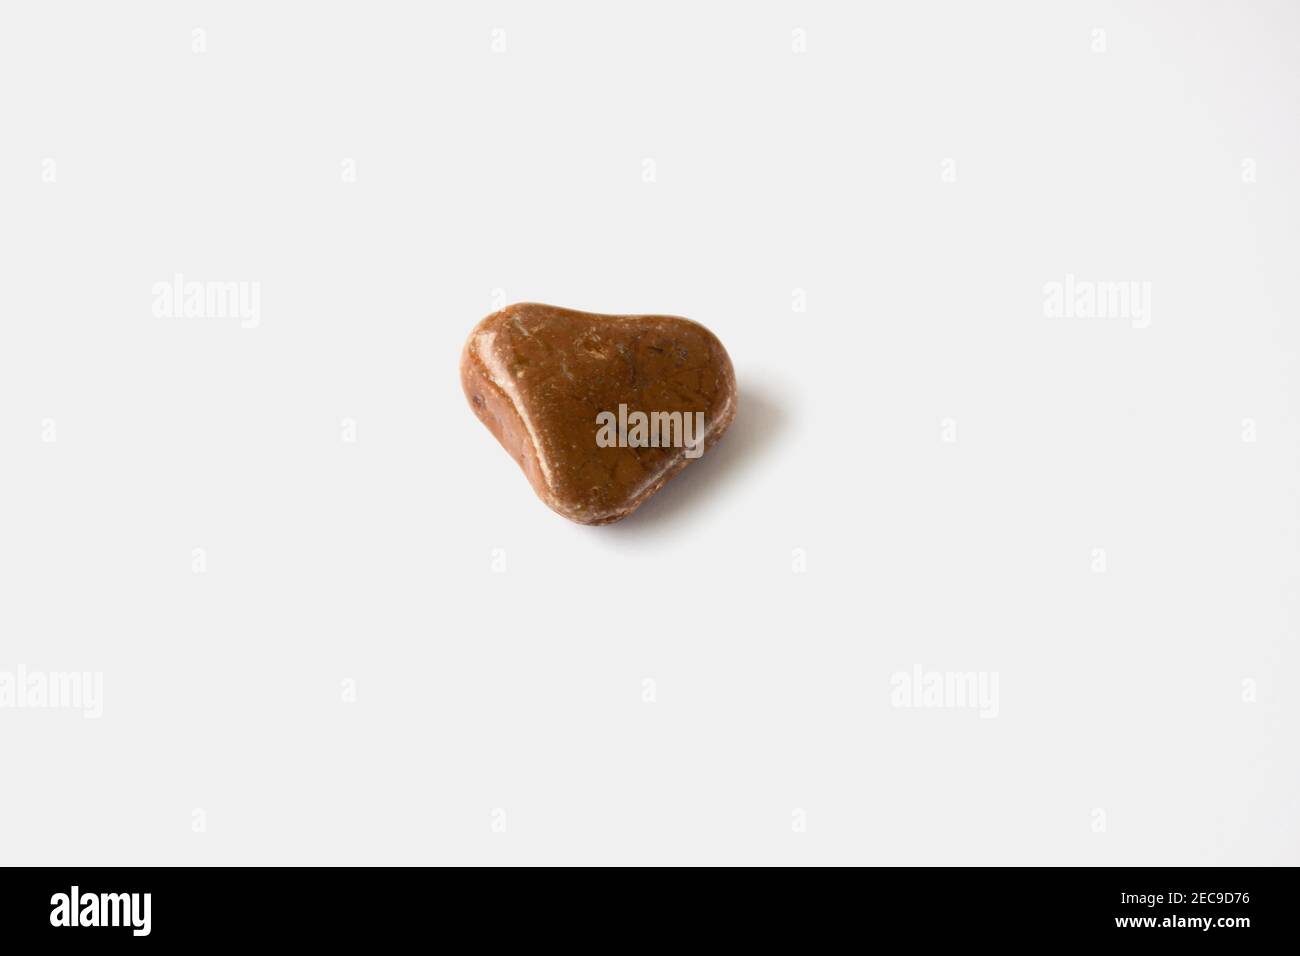 Brown stone in the shape of a heart on a white background. Stock Photo